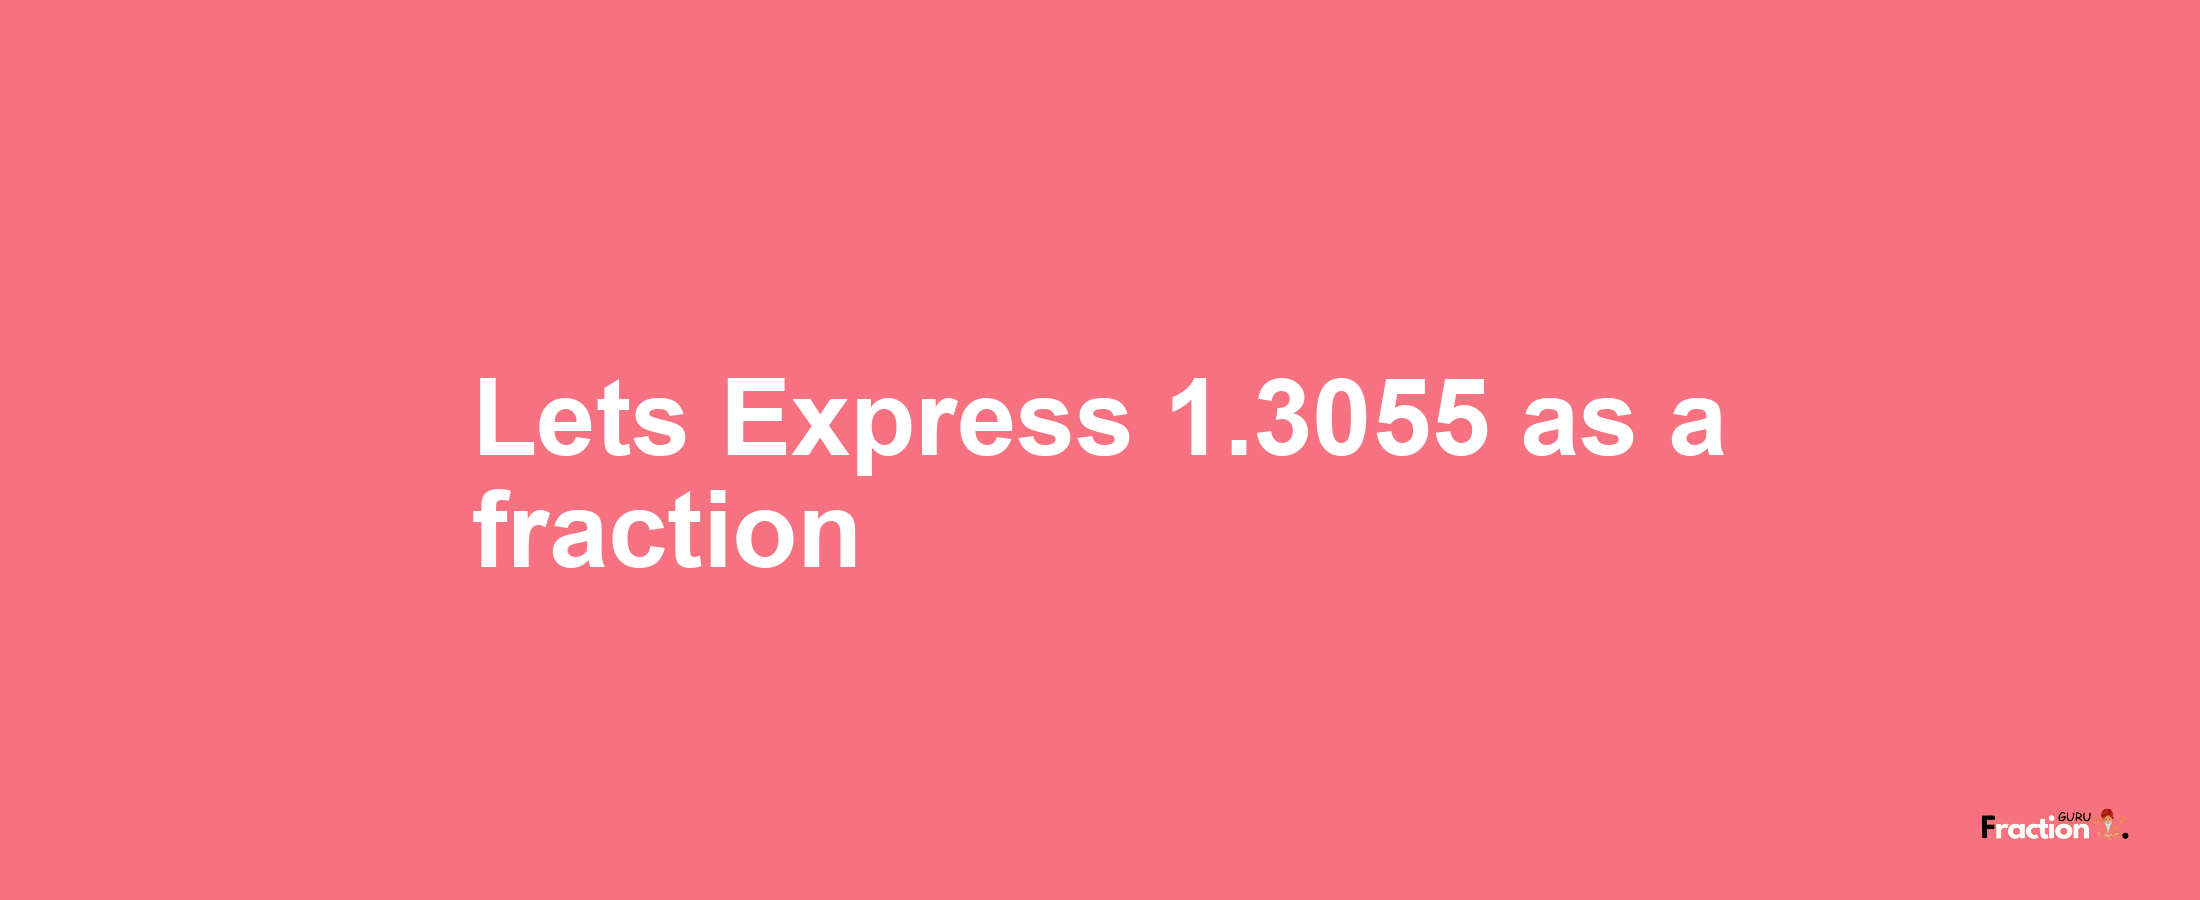 Lets Express 1.3055 as afraction